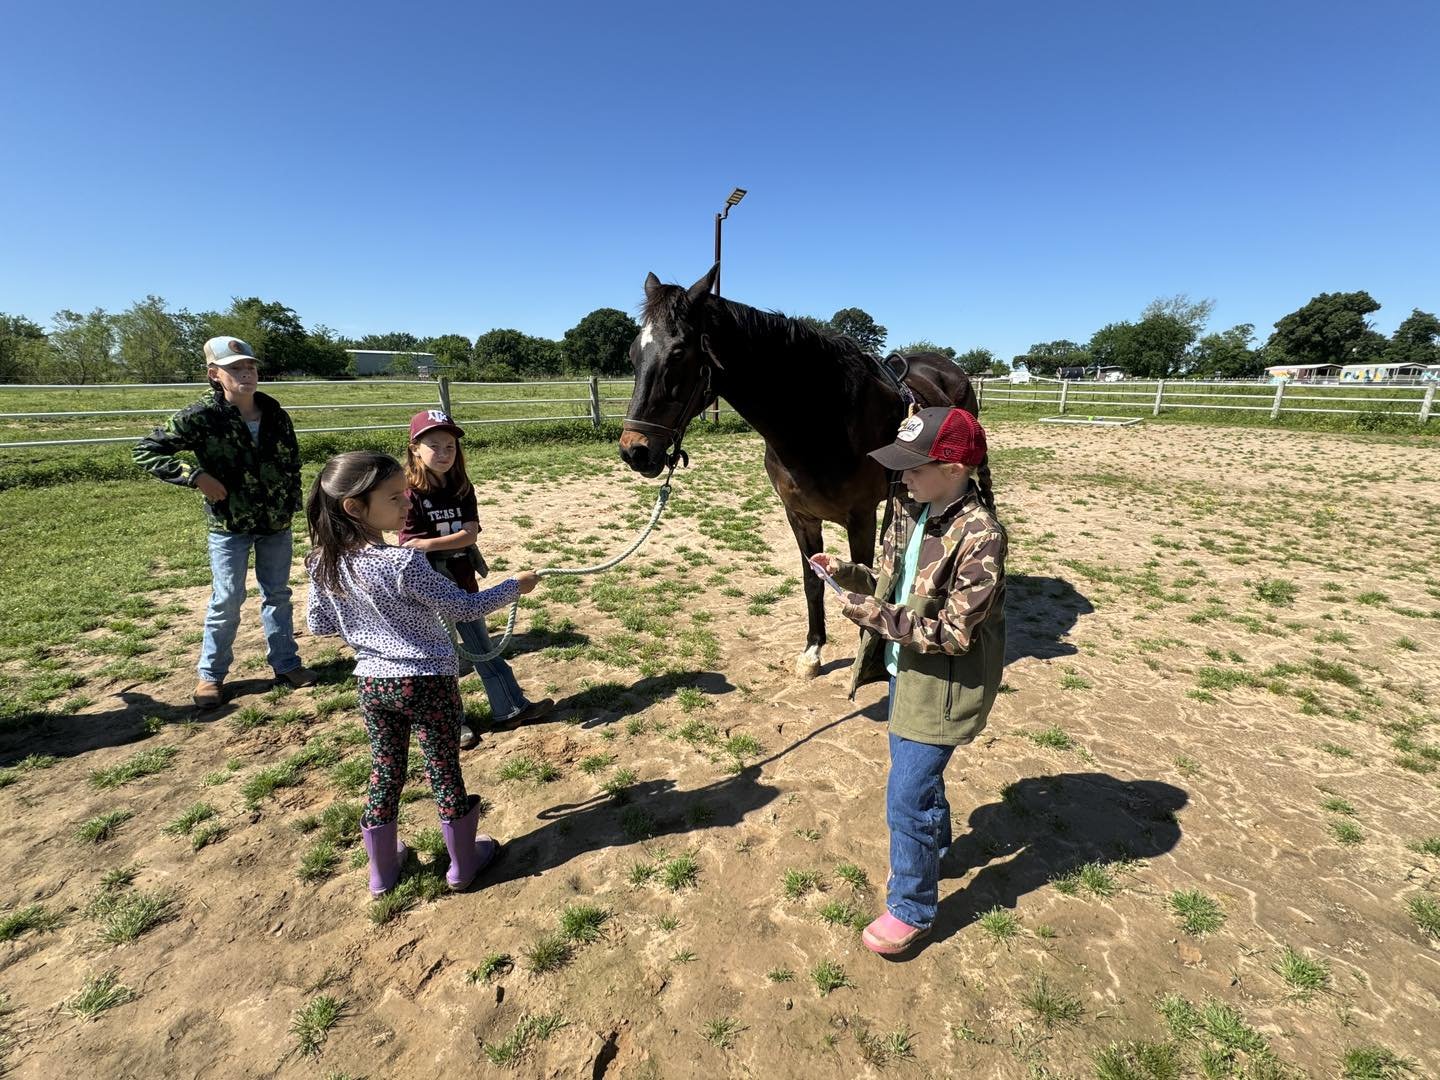 Another great day with the @Northeast Texas Prairie Classroom kids! We did some Horse Powered Reading, learned about all of the different types of saddles and tack and then they got to ride!